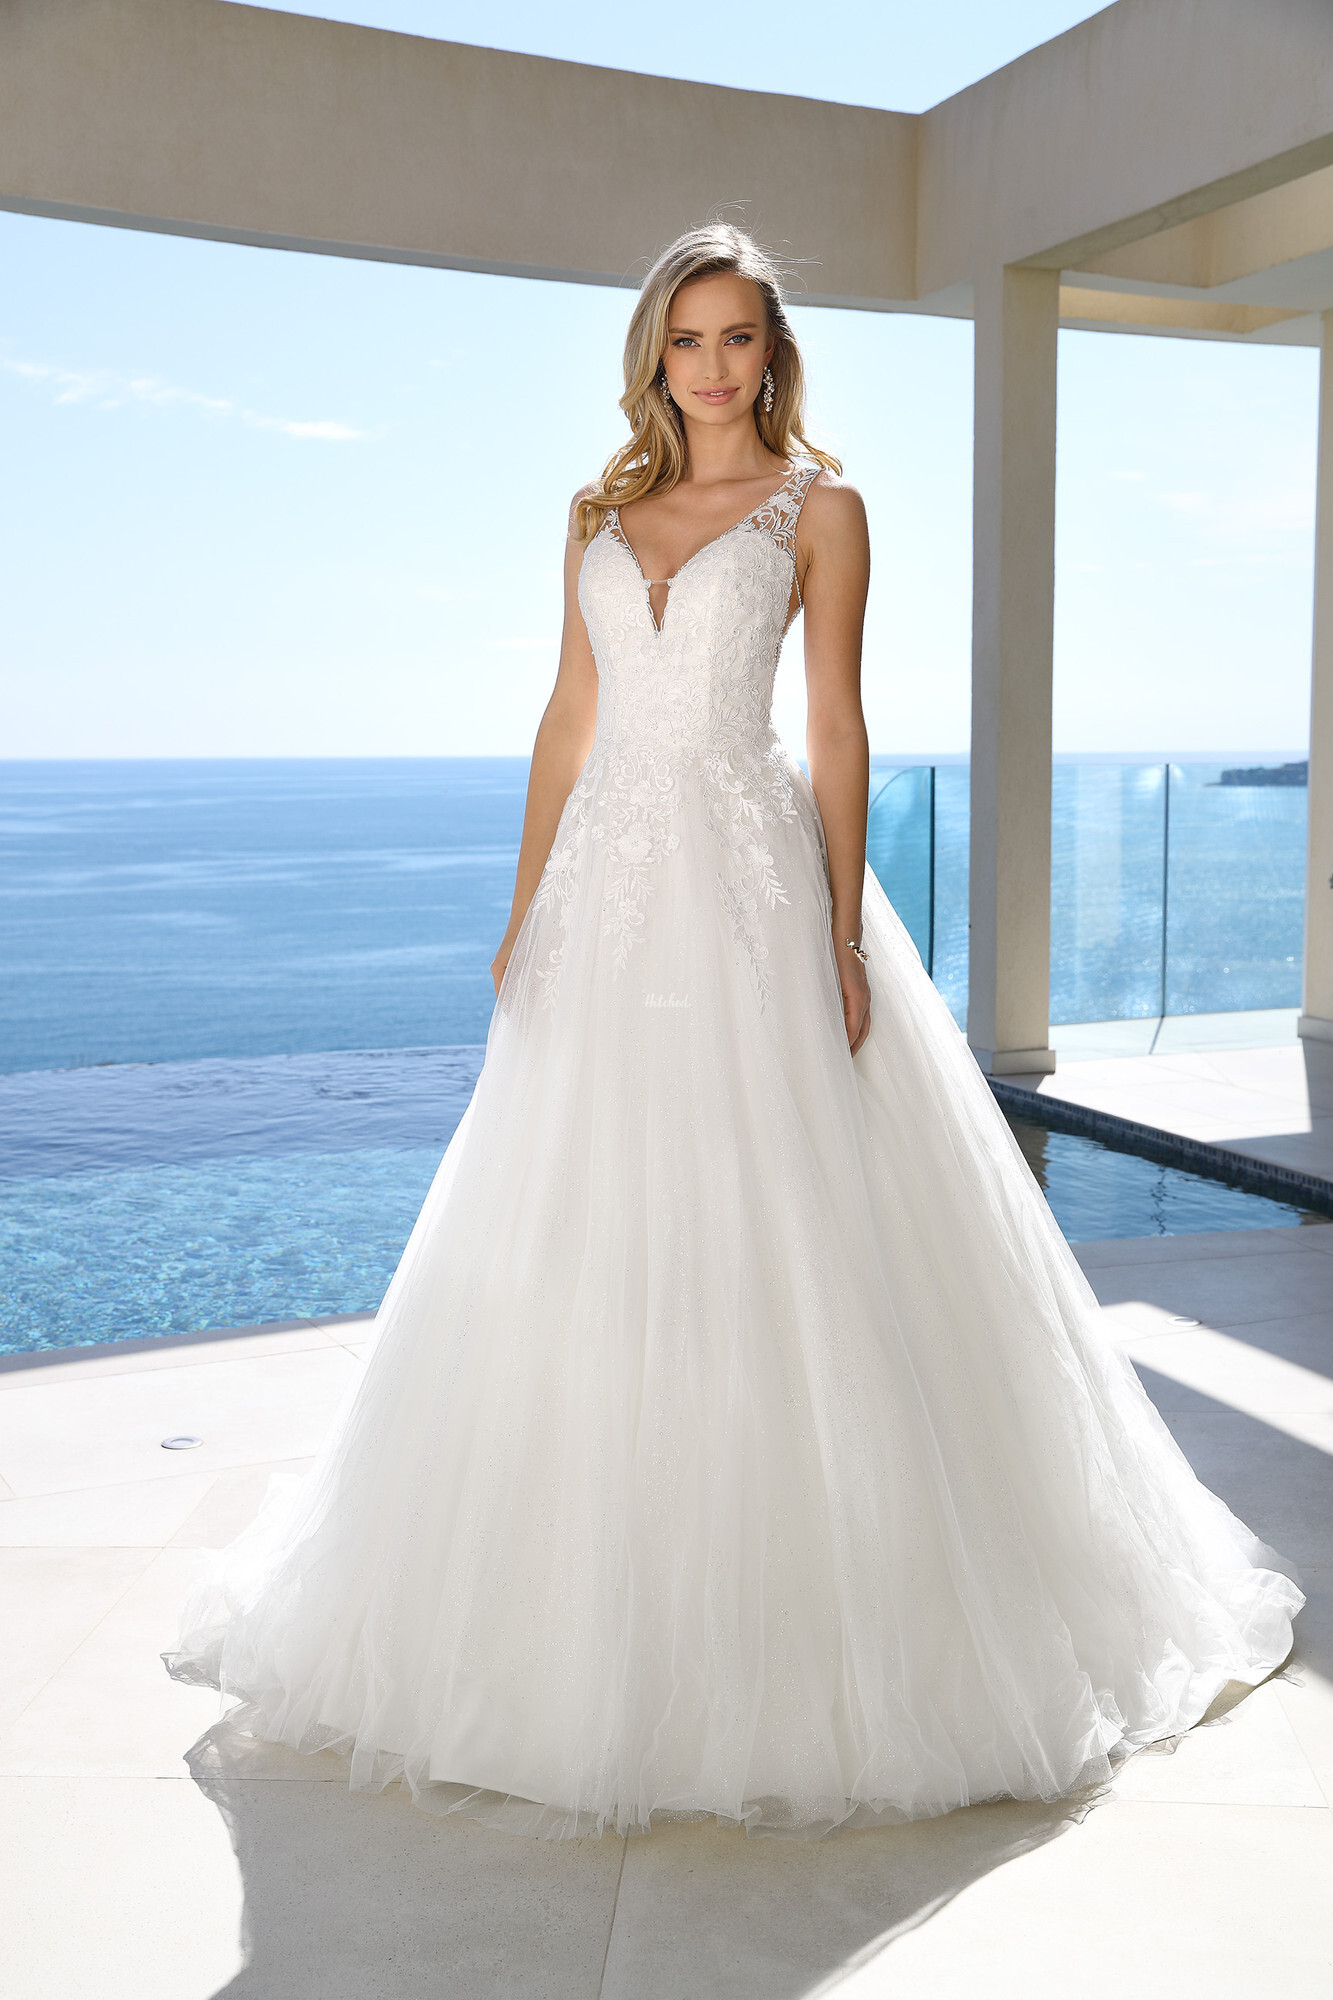 421081 Wedding Dress from Ladybird - hitched.co.uk